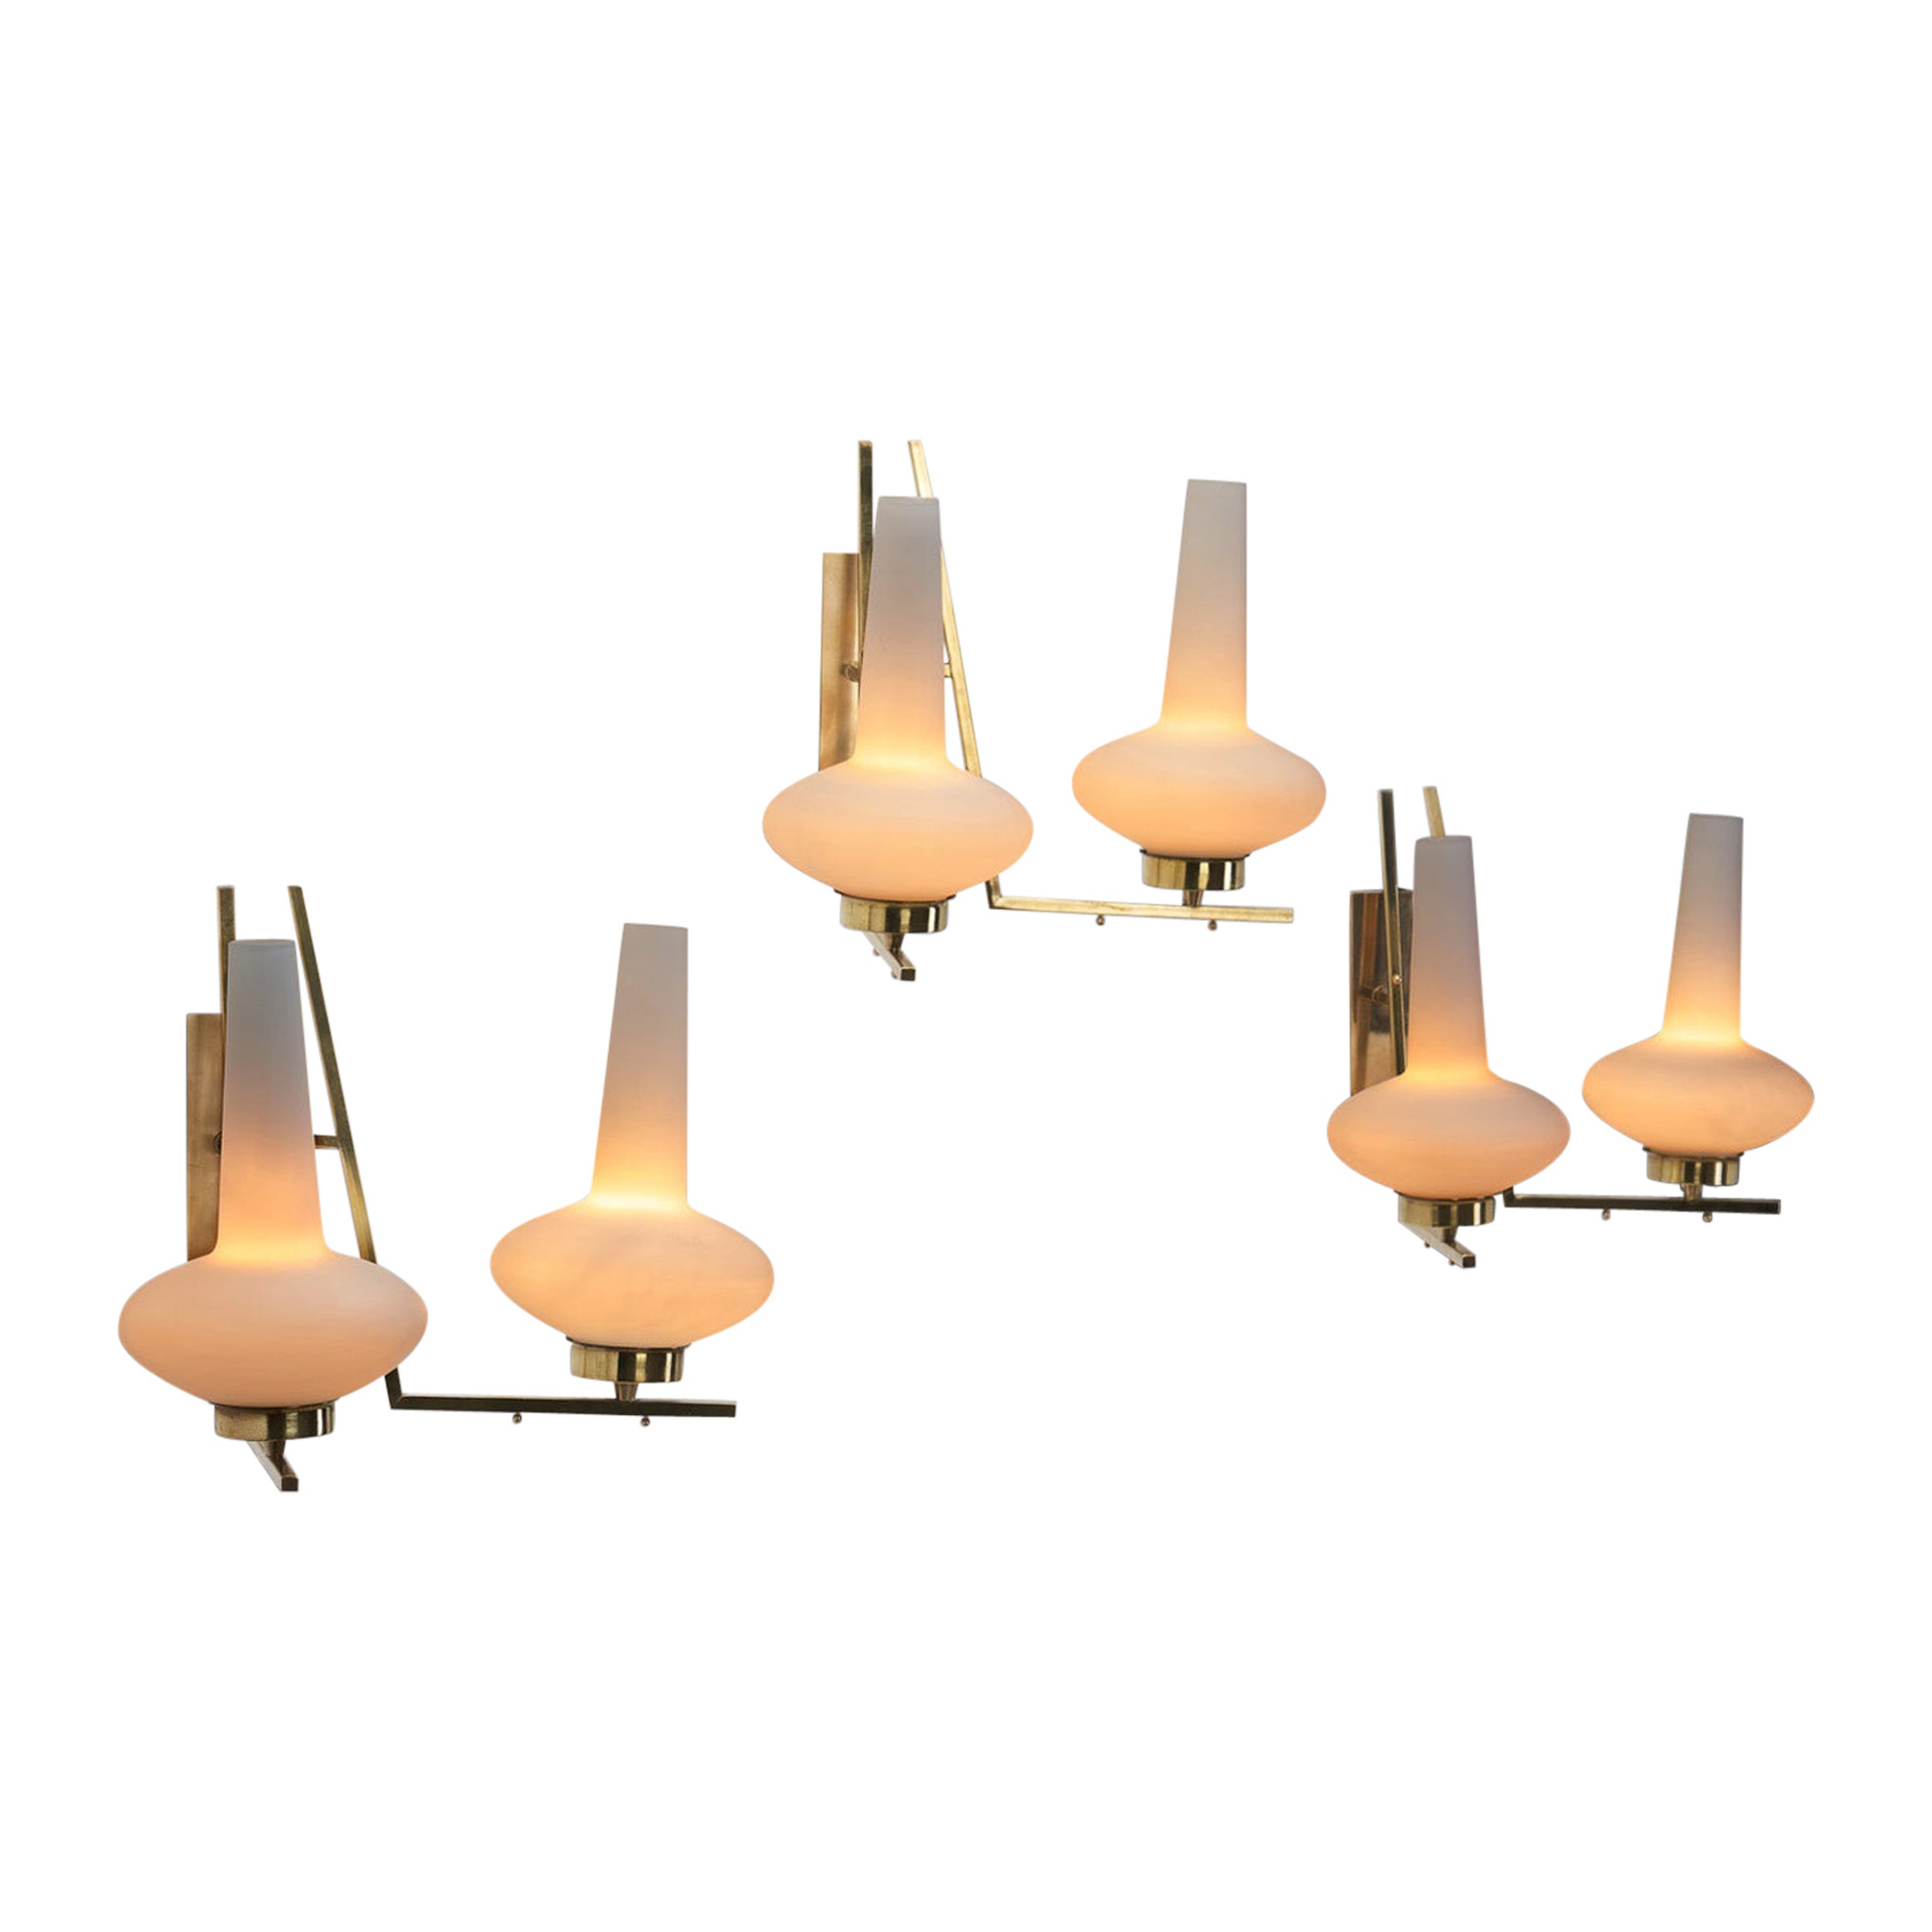 Italian Mid-Century Modern Brass and Glass Wall Lamps, Italy 1950s For Sale